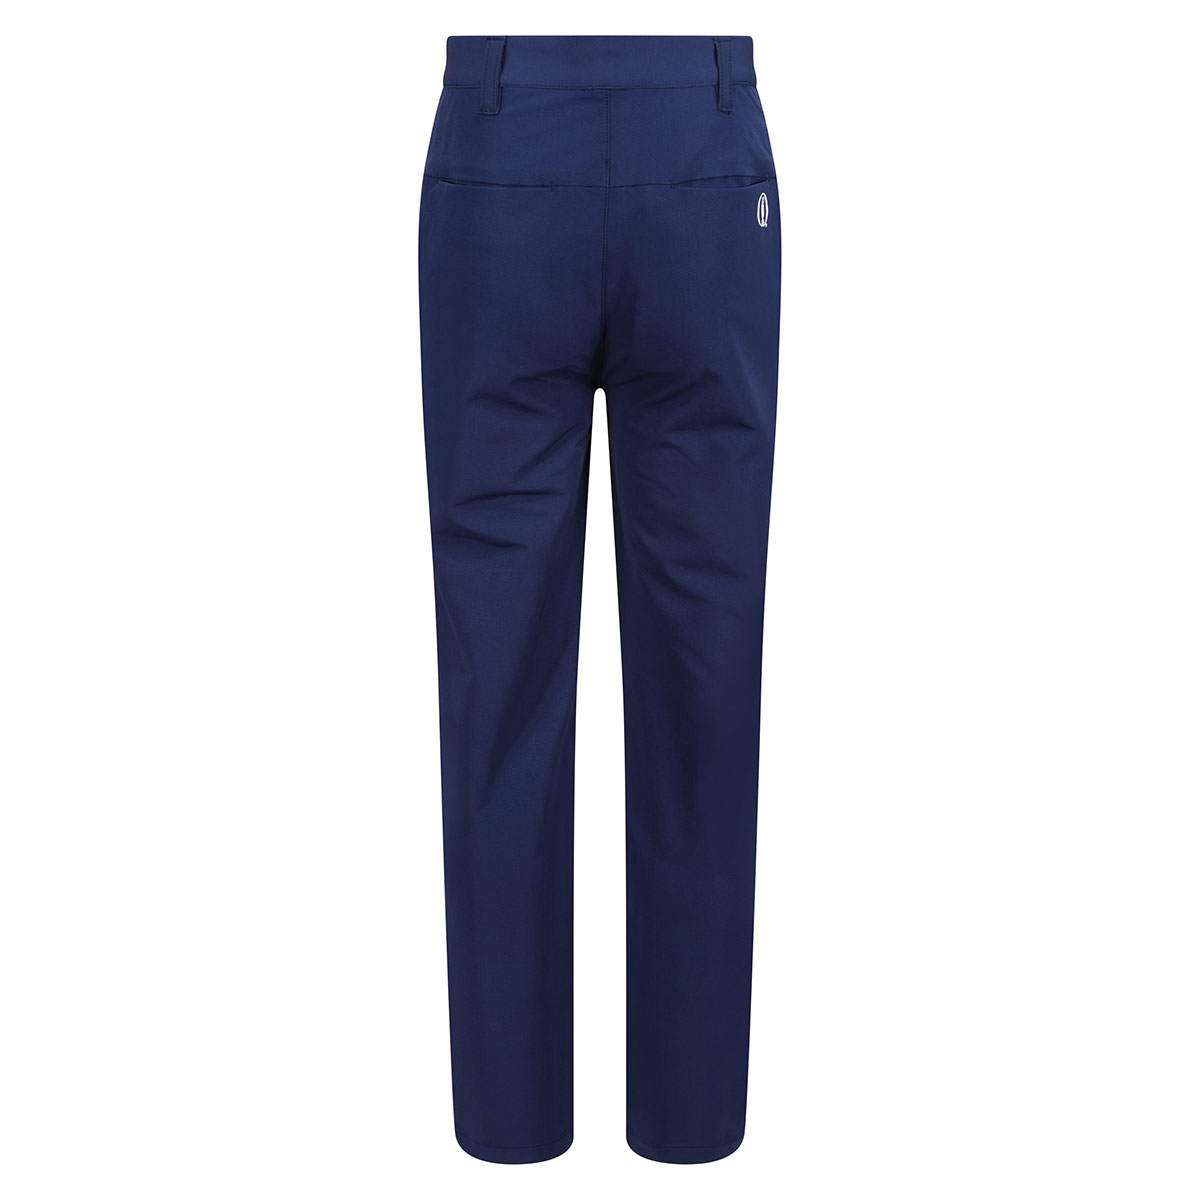 Stromberg Junior The Open Ranger Stretch Golf Trousers from american golf